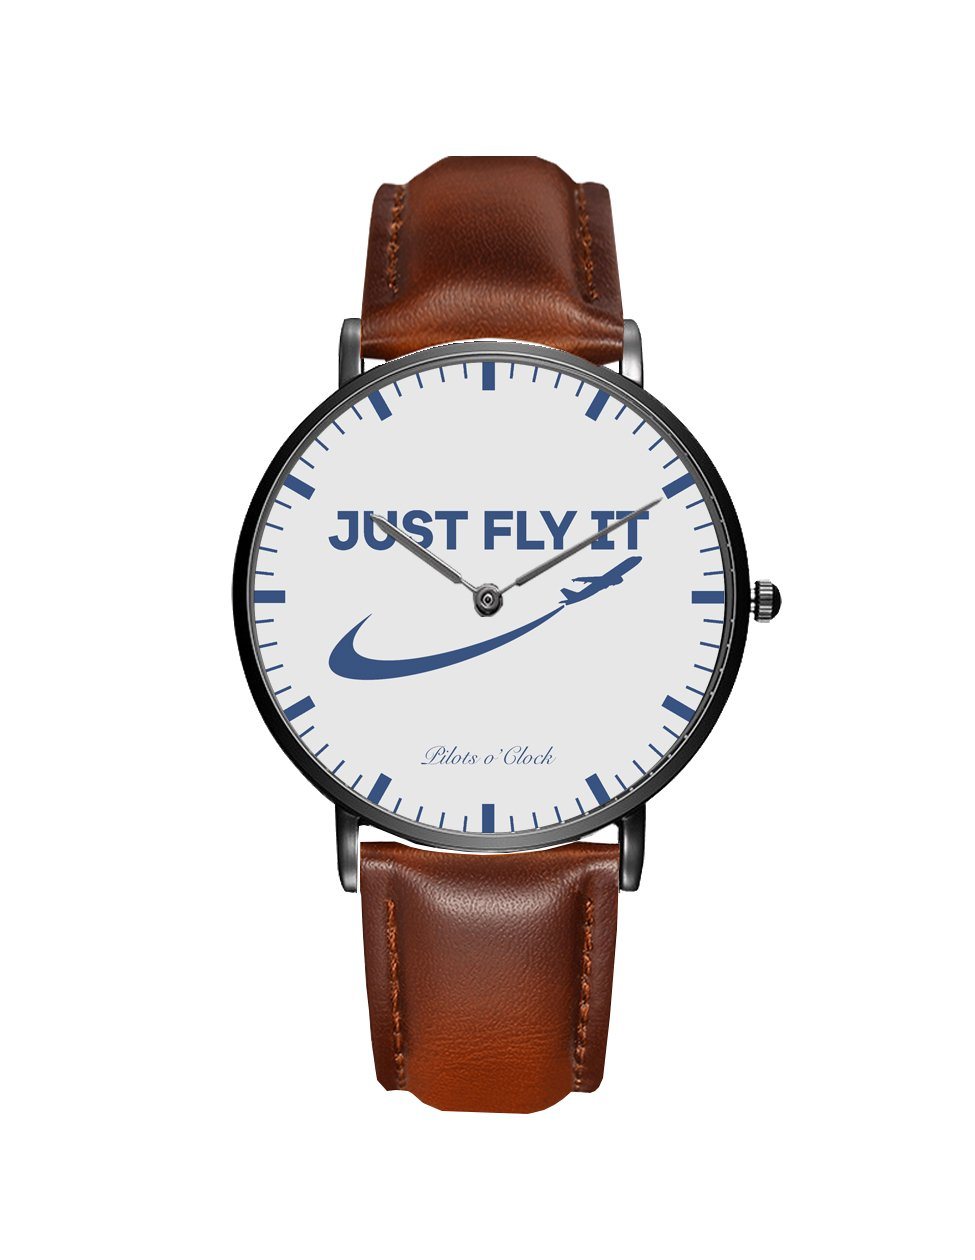 Just Fly It 2 Leather Strap Watches Pilot Eyes Store Black & Brown Leather Strap 